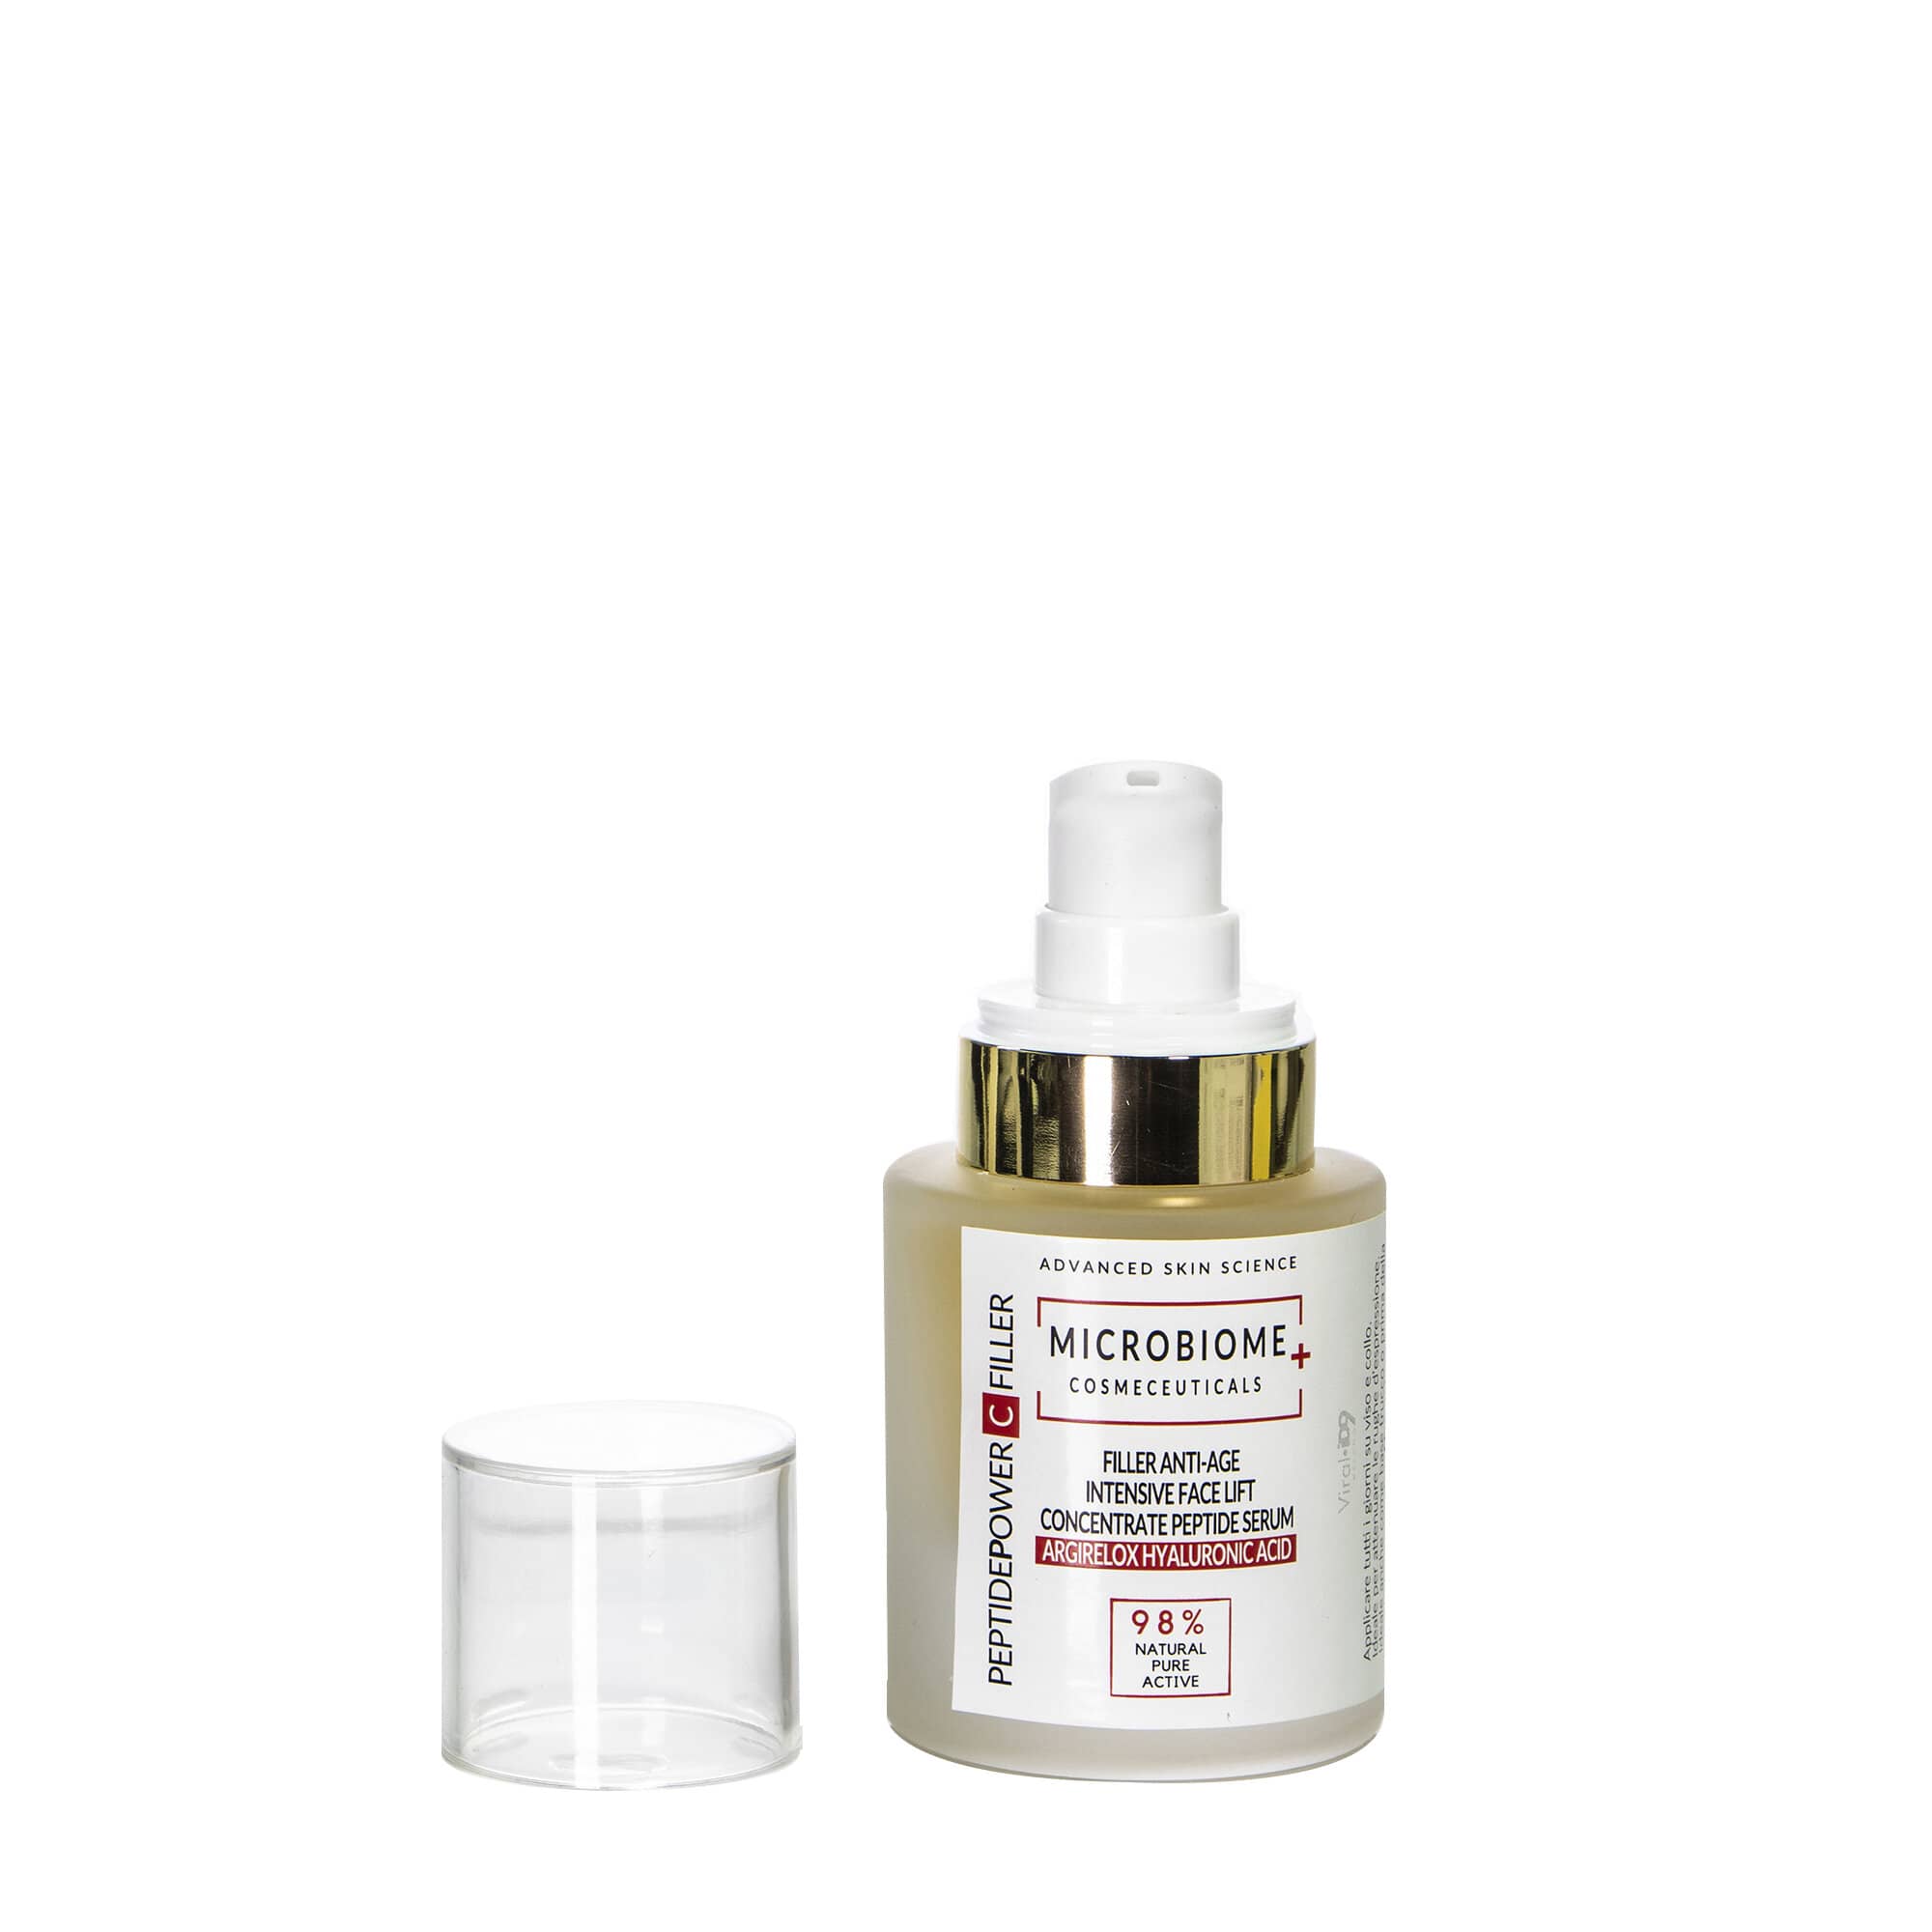 Microbiome Cosmeceuticals Peptidepower C Filler